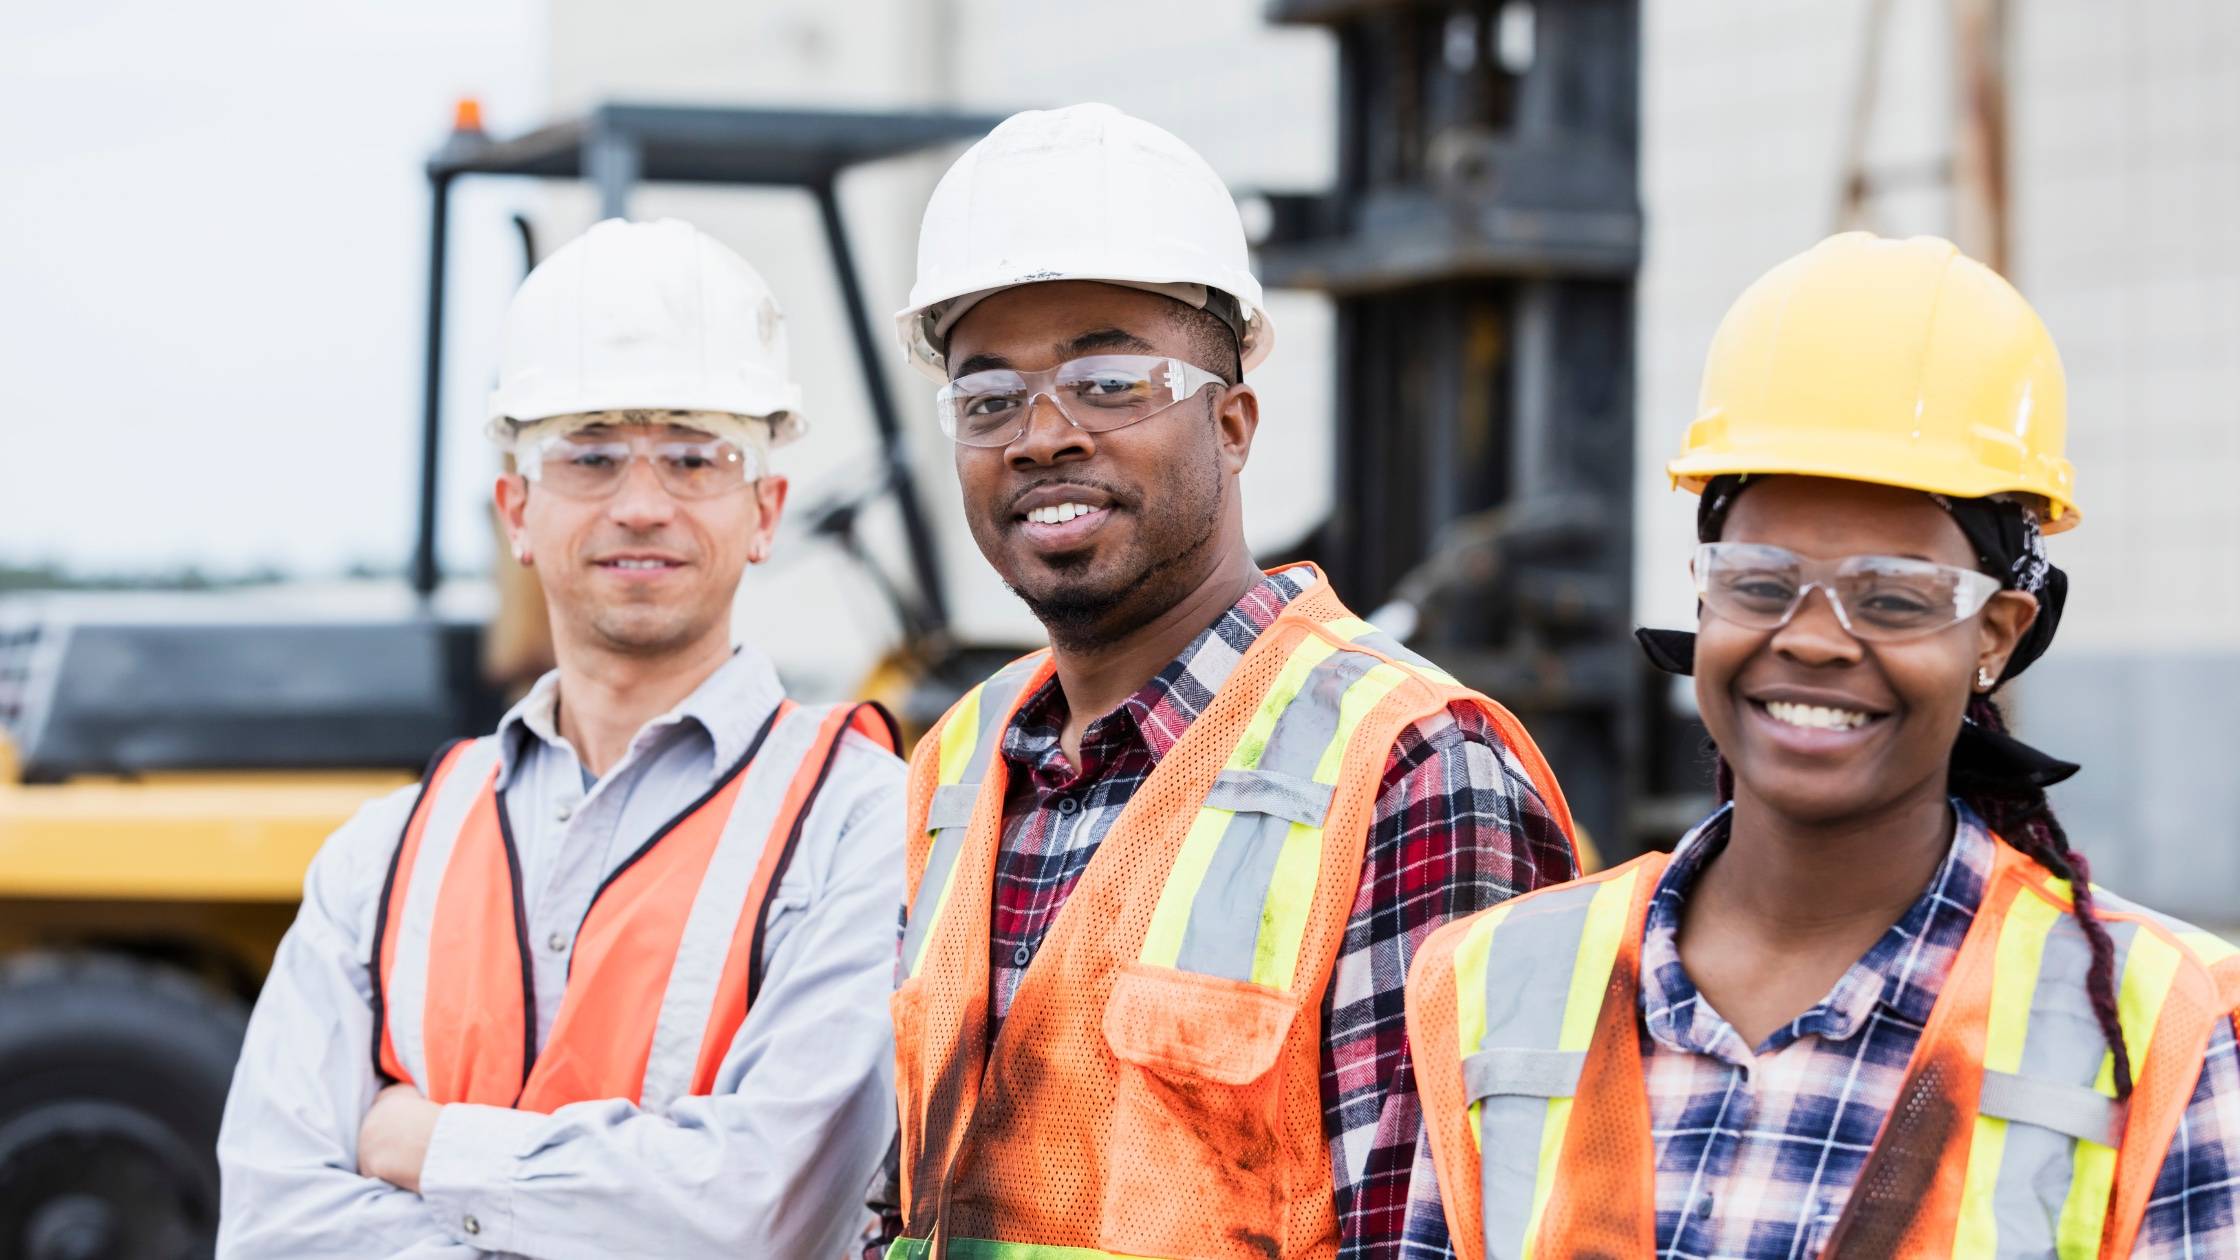 Diversity, equity, and inclusion | Inclusive construction jobs